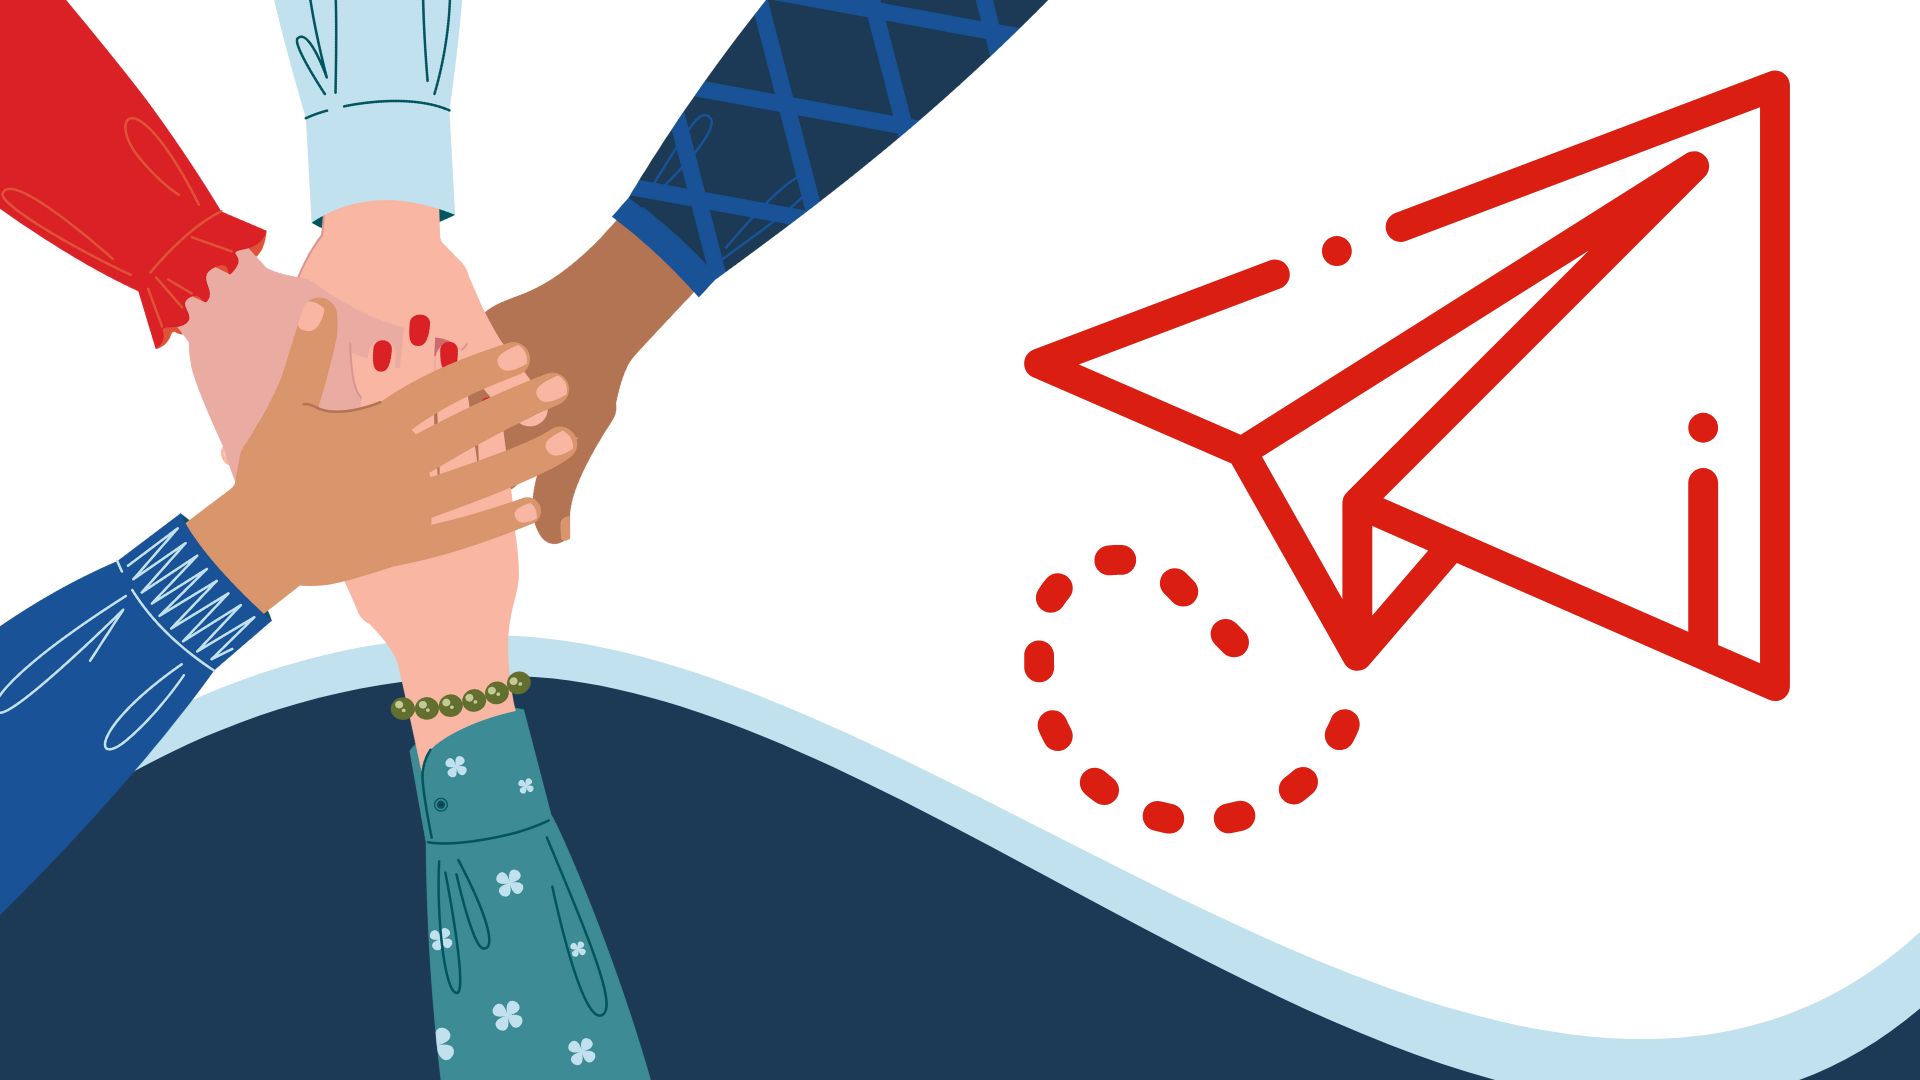 illustration of helping hands, wave and paper airplane icon